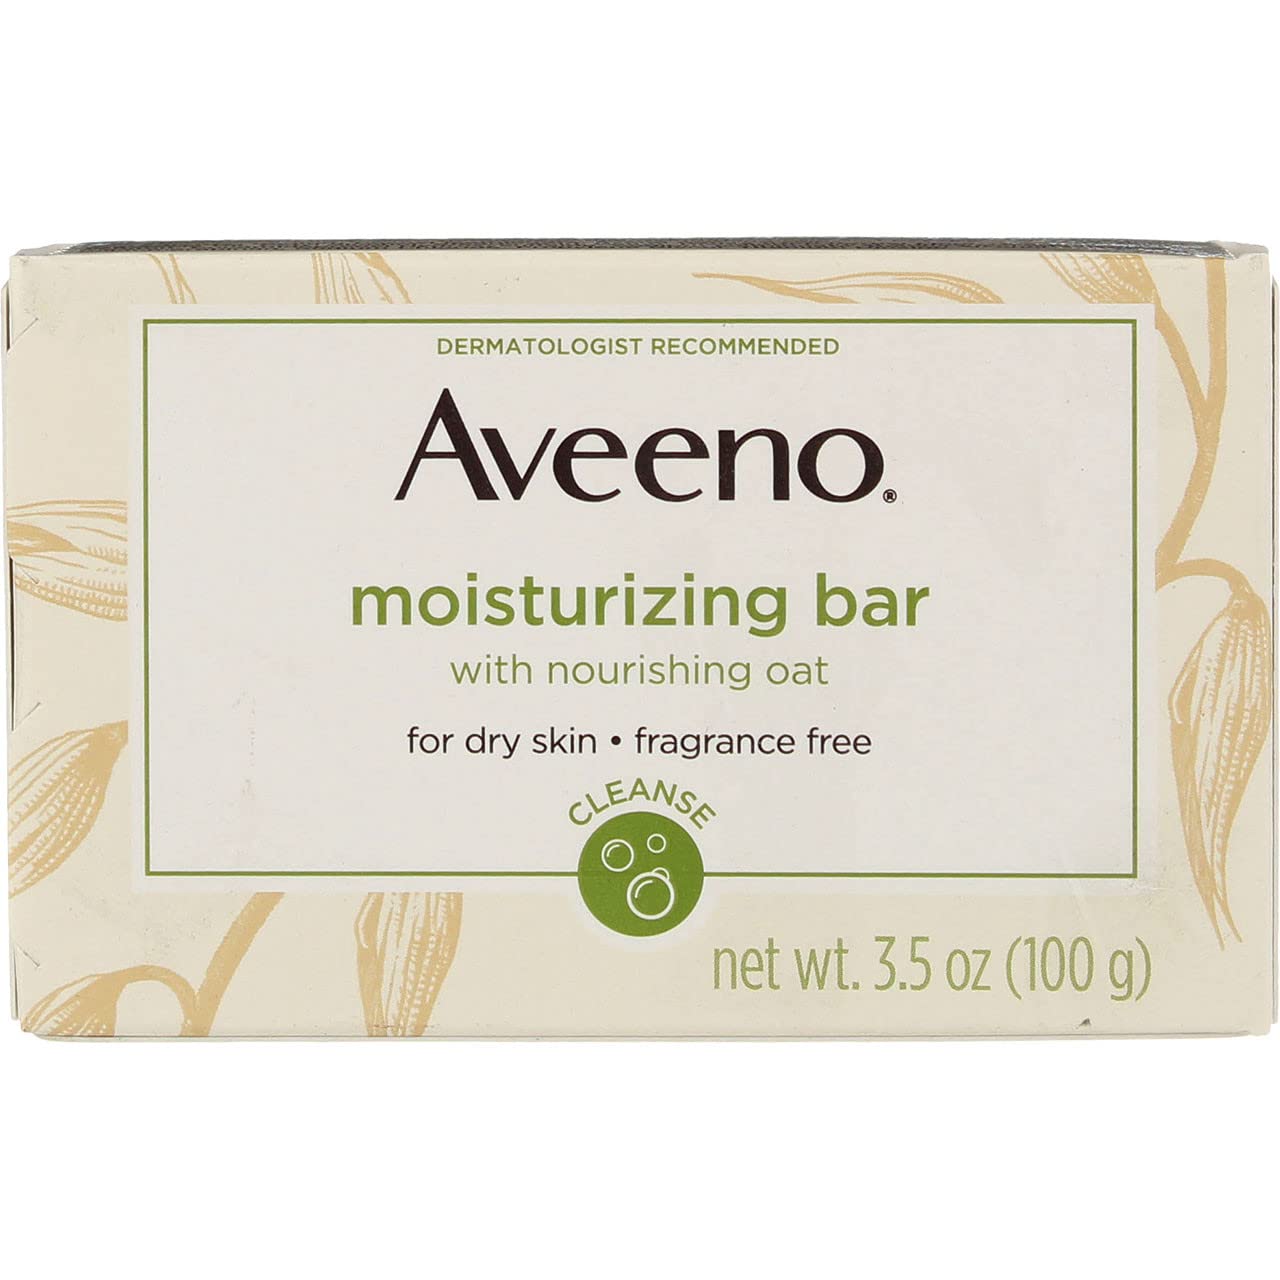 Aveeno Moisturizing Bar with Natural Colloidal Oatmeal for Dry Skin, Fragrance Free, 3.5 Oz (2 Pack)